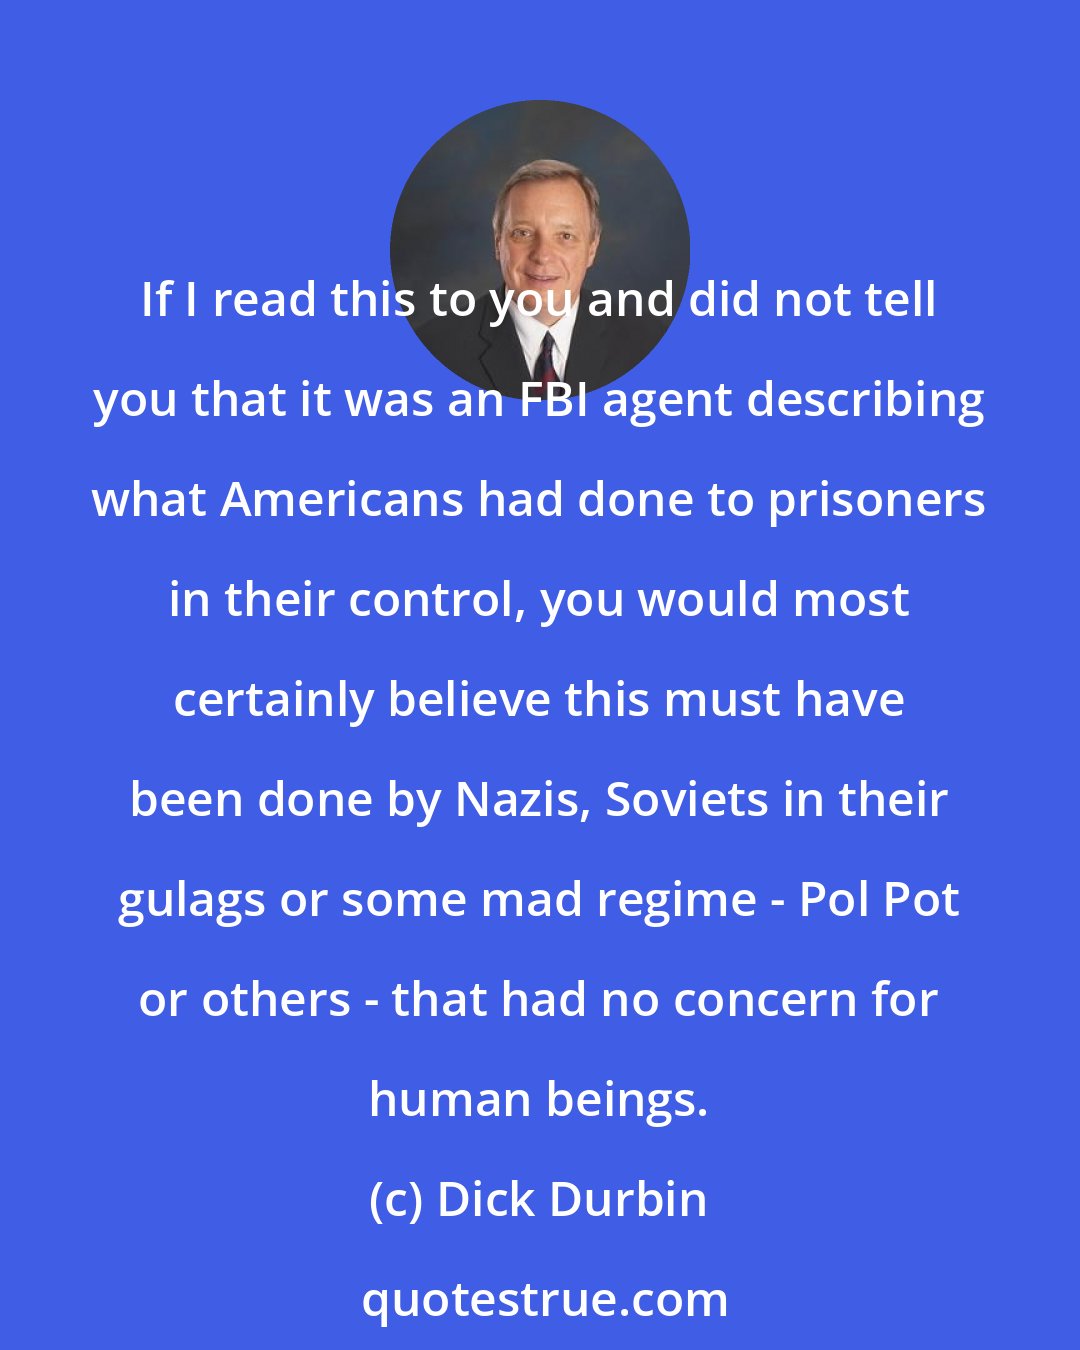 Dick Durbin: If I read this to you and did not tell you that it was an FBI agent describing what Americans had done to prisoners in their control, you would most certainly believe this must have been done by Nazis, Soviets in their gulags or some mad regime - Pol Pot or others - that had no concern for human beings.